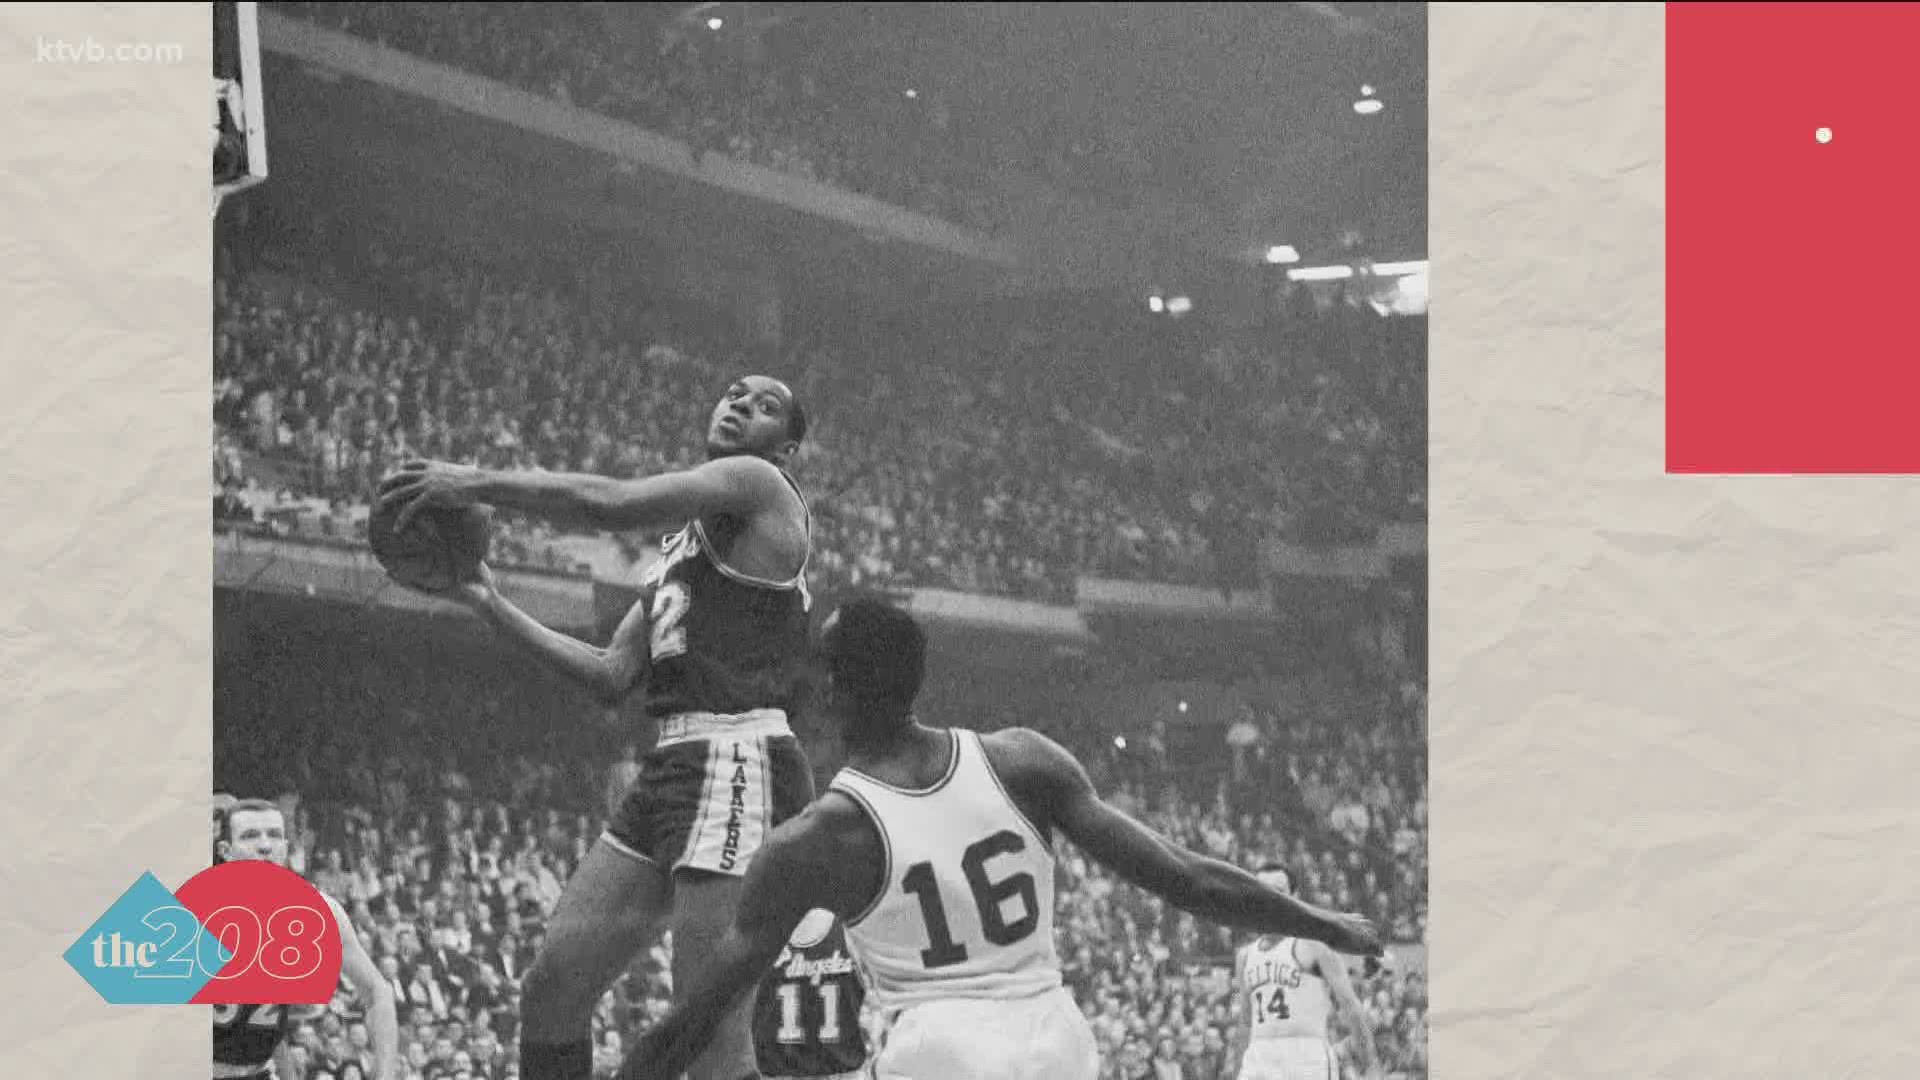 Nah, this one is different. In 1961/62, Elgin Baylor spent his